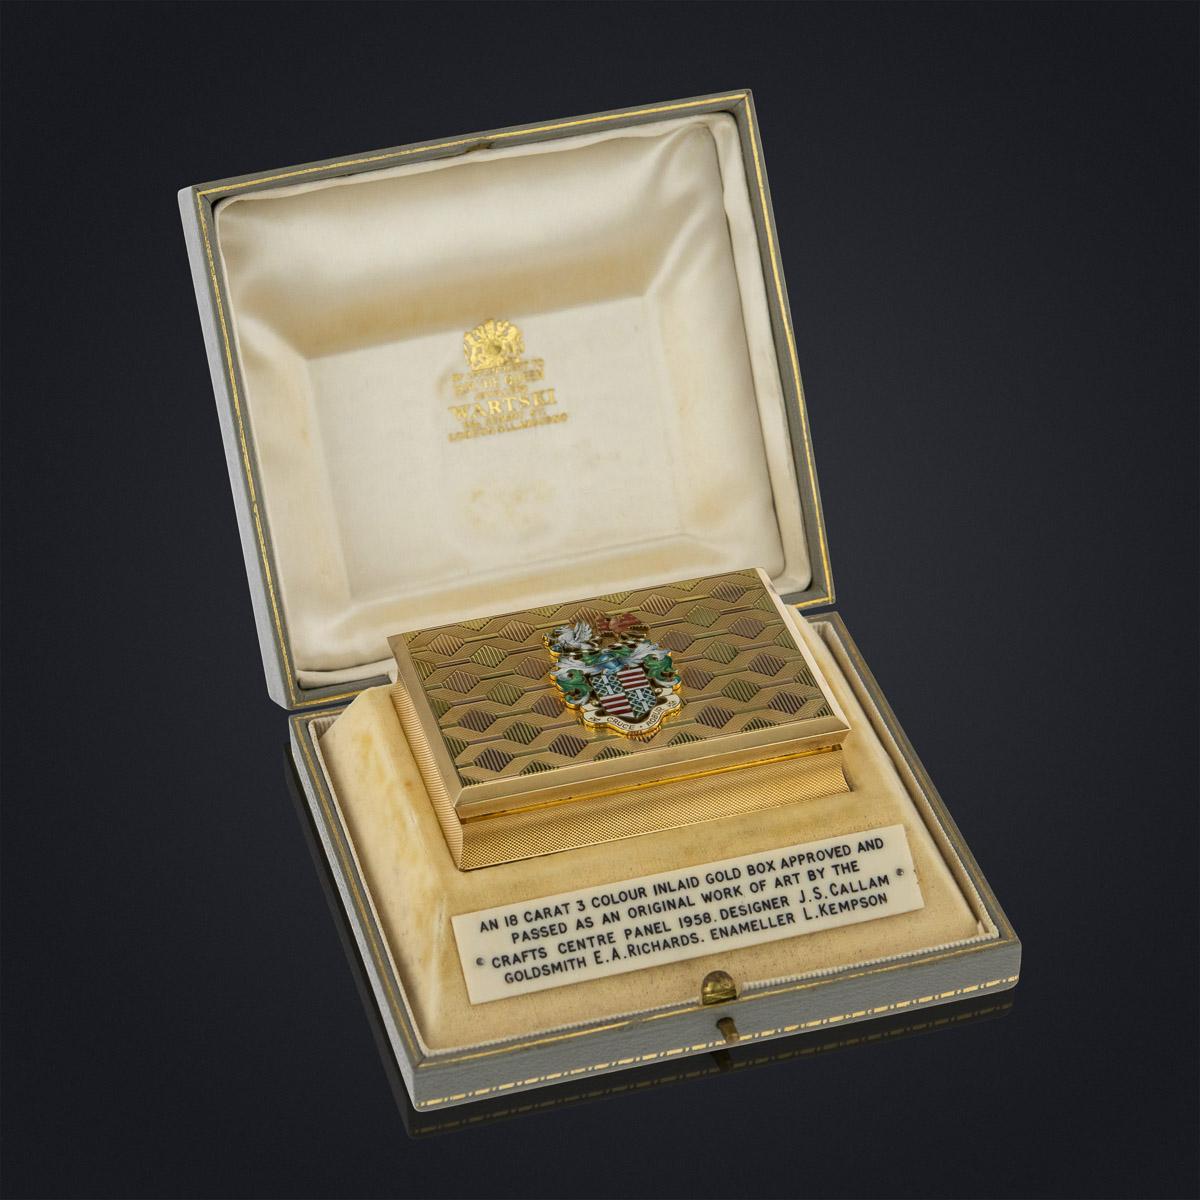 Stunning 20th century English presentation three-colored 18-karat gold snuff box, of rectangular form with slightly inverted sides, beautifully engraved with engine turned decoration and applied with a large enamel heraldic coat of arms with the